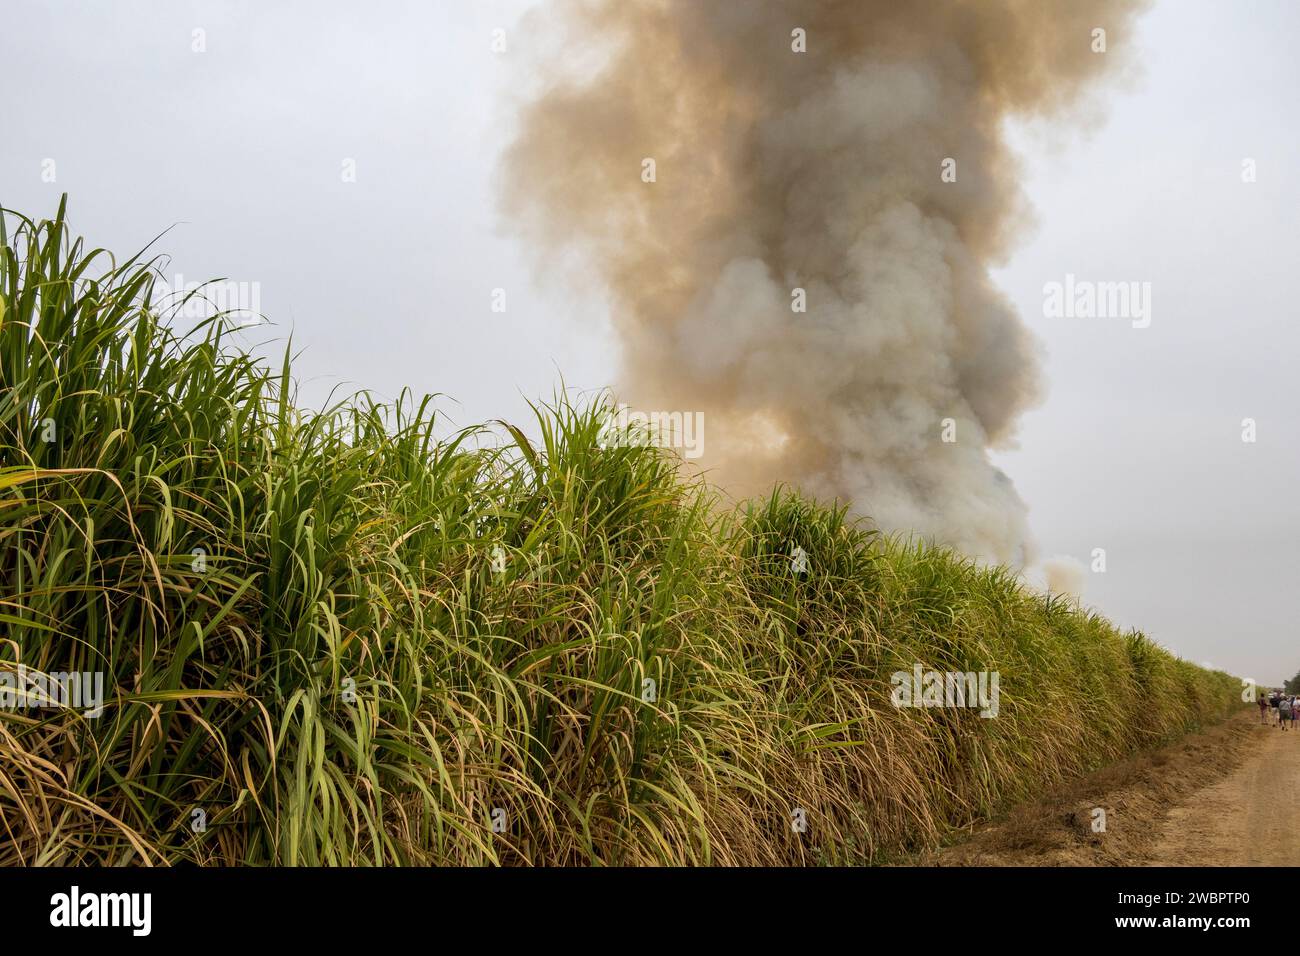 West Africa, Senegal, Richard Toll sugar plantation. Here the cane has been burnt to drive out animals harmful to the men harvesting sugar cane. Stock Photo